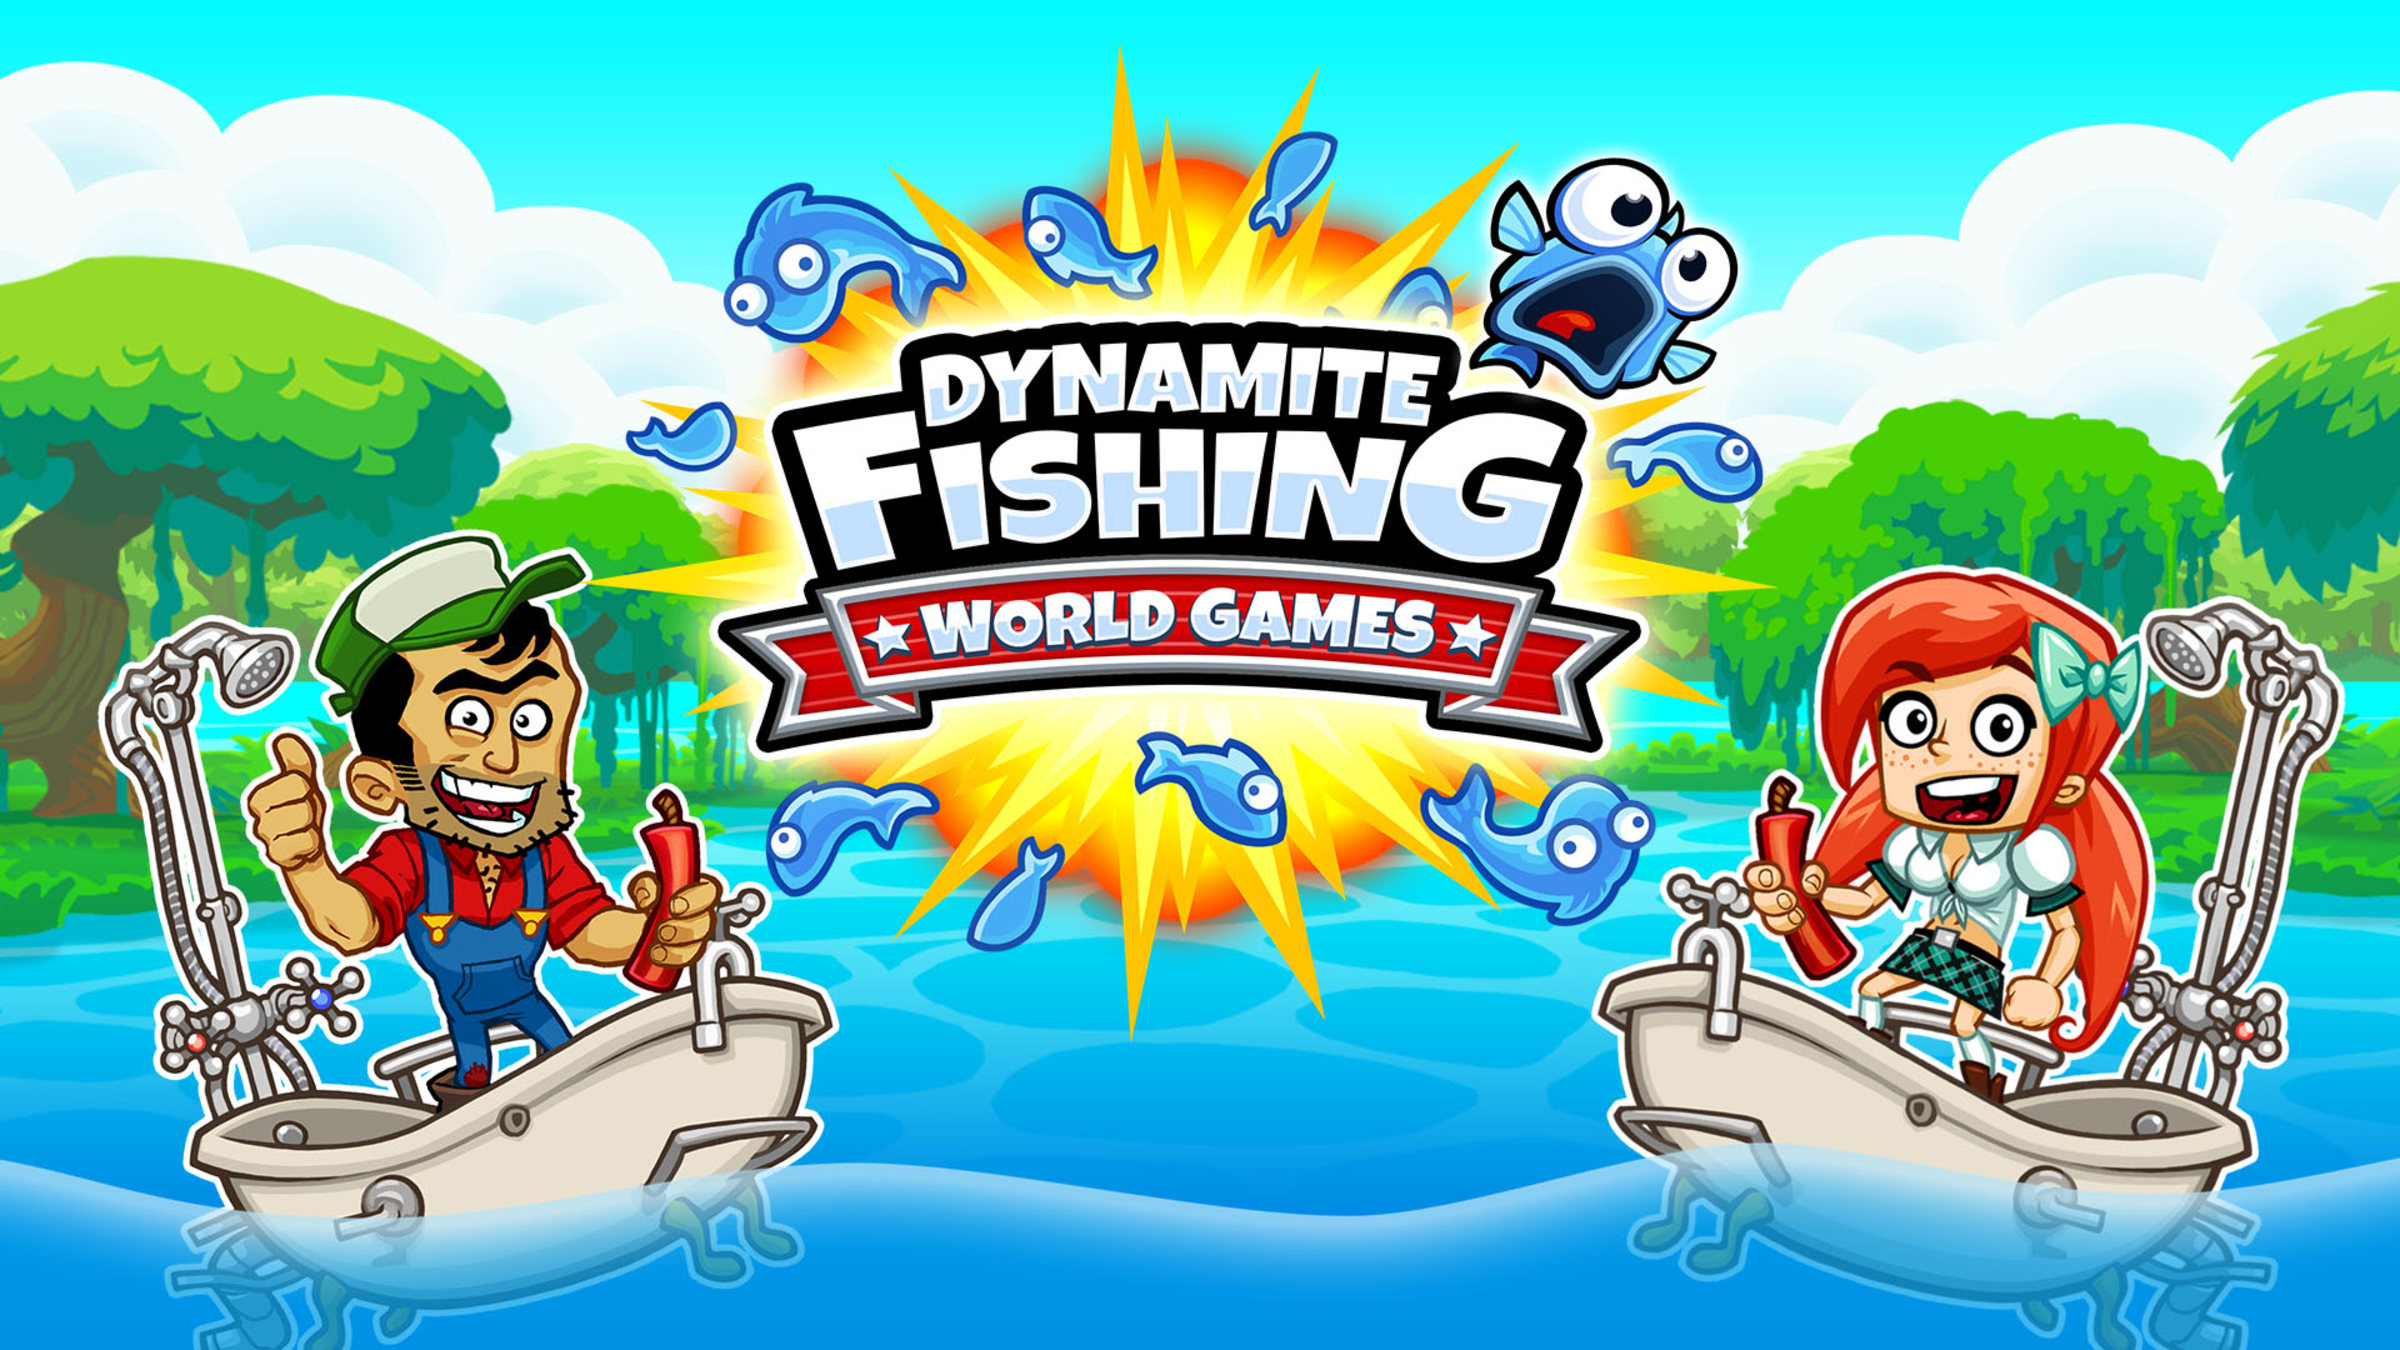 Dynamite Fishing - World Games for Nintendo Switch - Nintendo Official Site